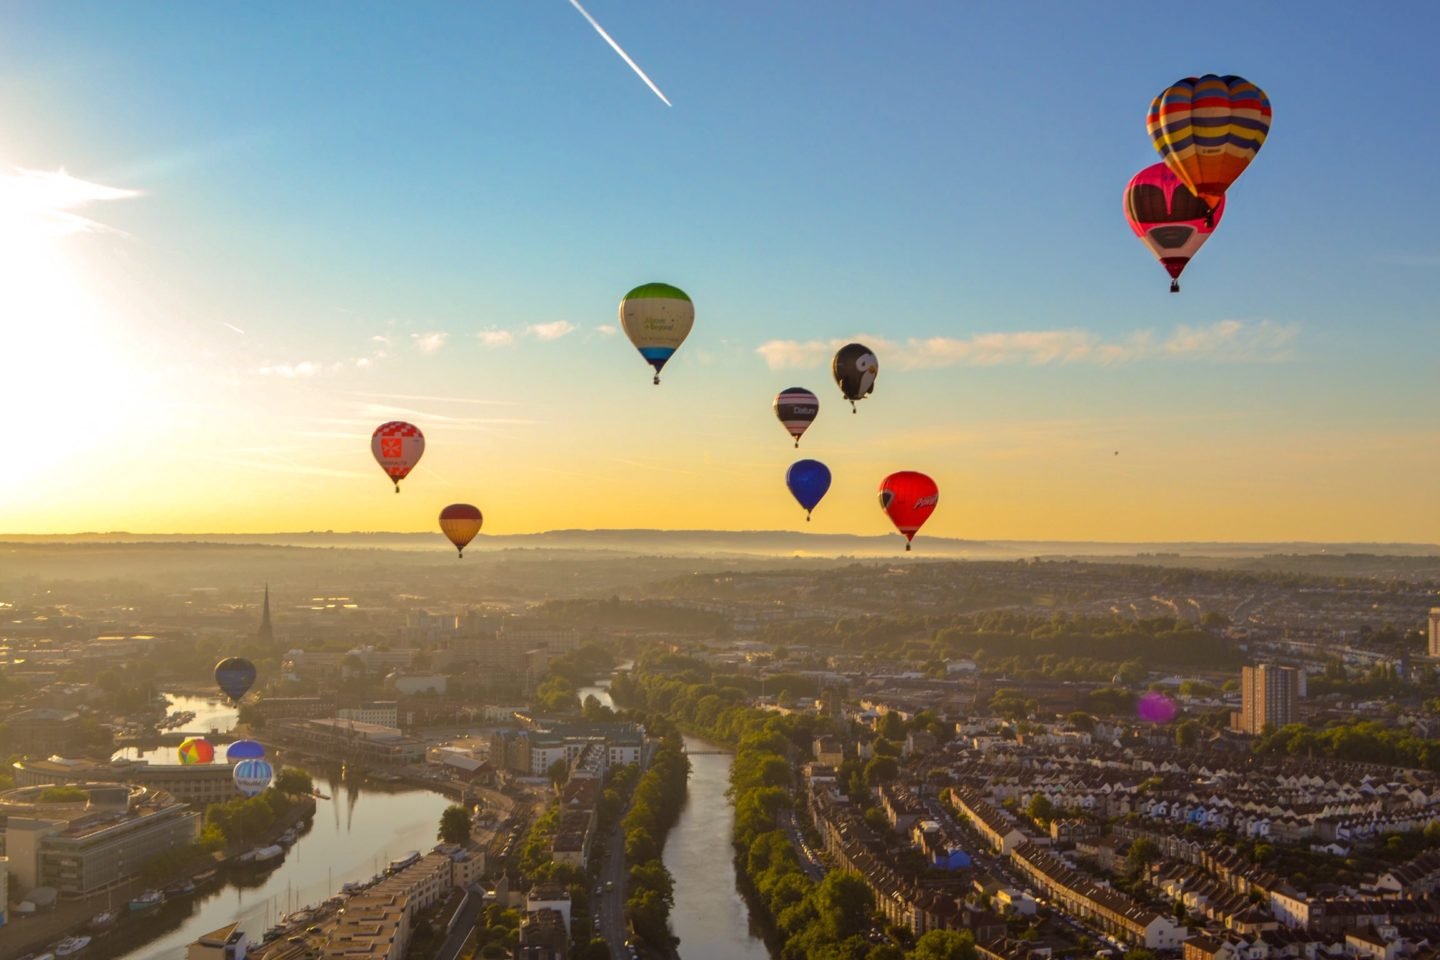 Where to take cracking photos of hot air balloons in Bristol